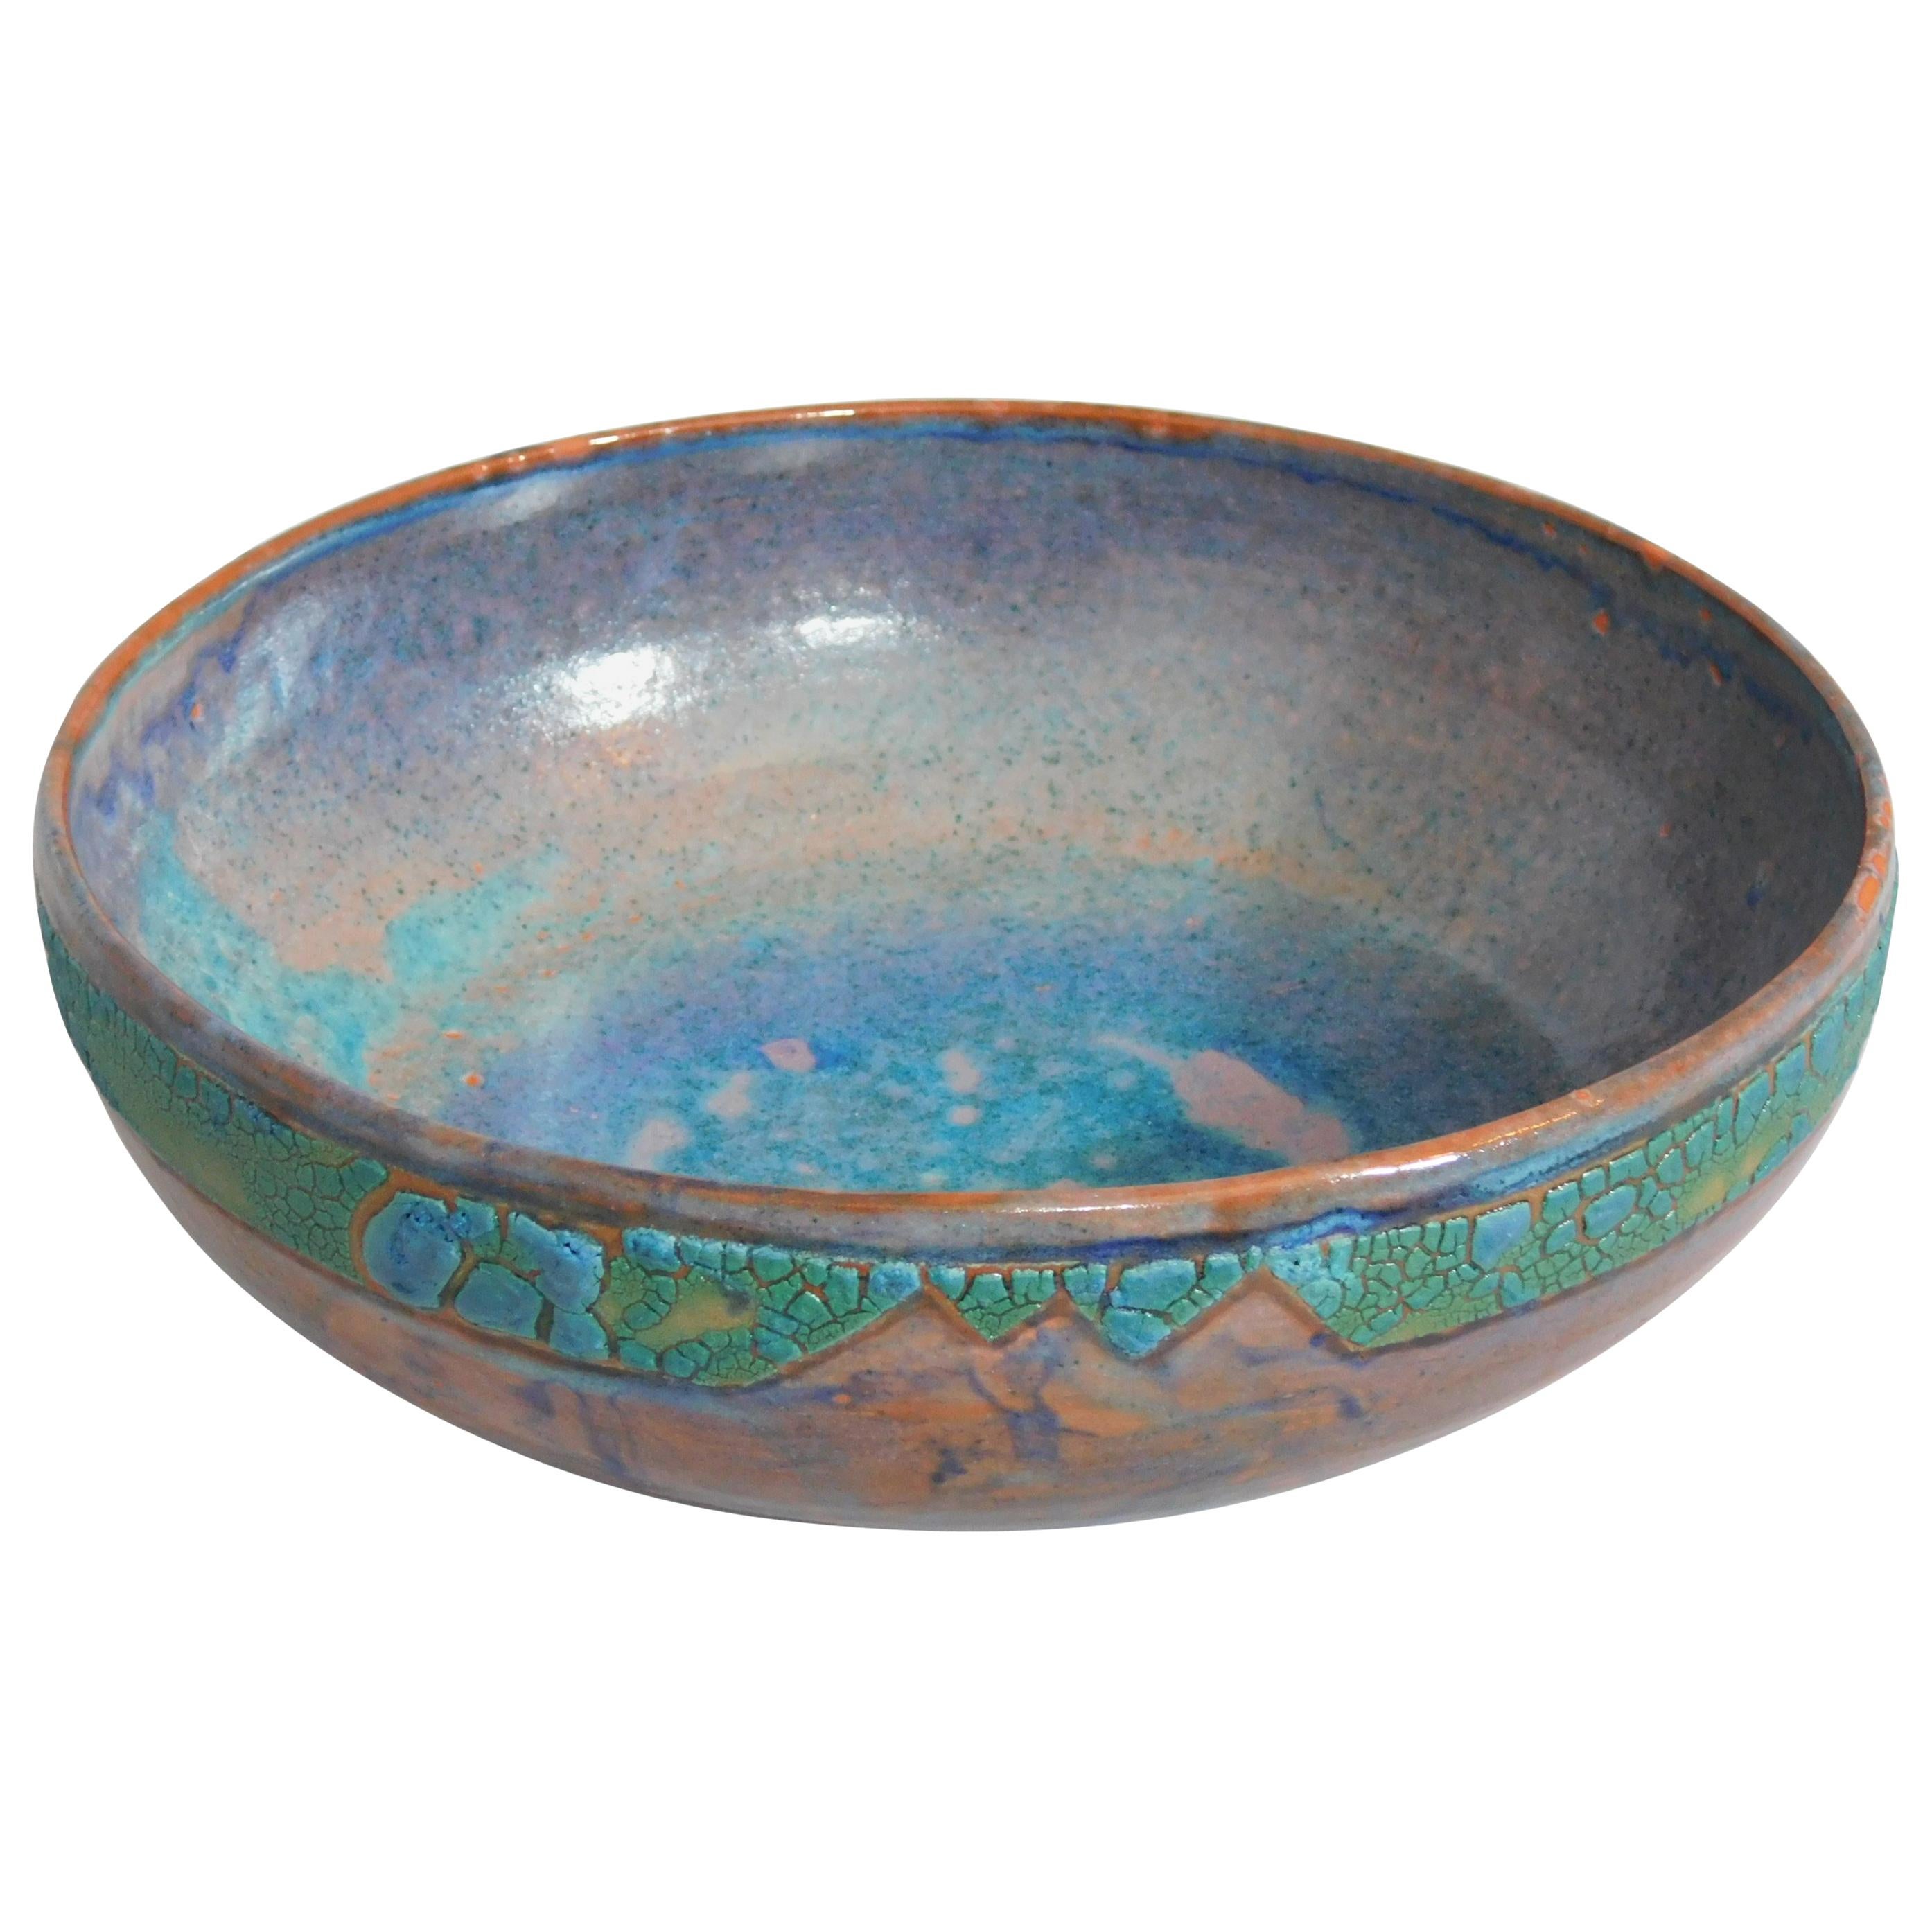 Sunset Plaza Ceramic Bowl by Andrew Wilder, 2018 For Sale